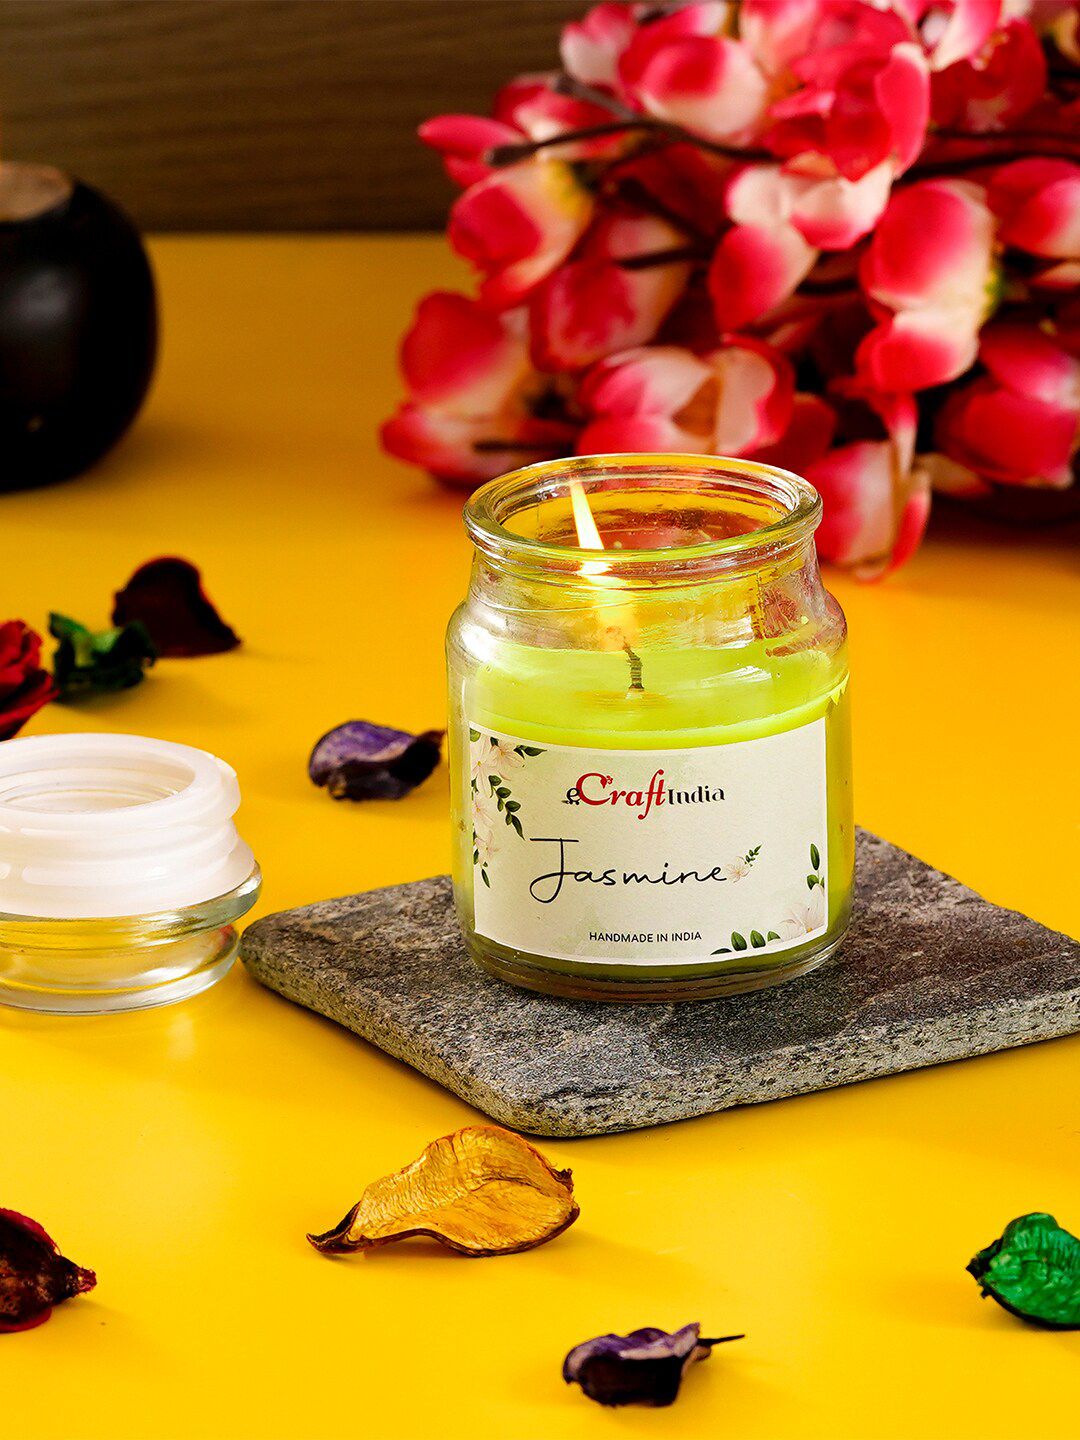 eCraftIndia Green & Transparent Solid Jasmine Scented Jar Candle Price in India